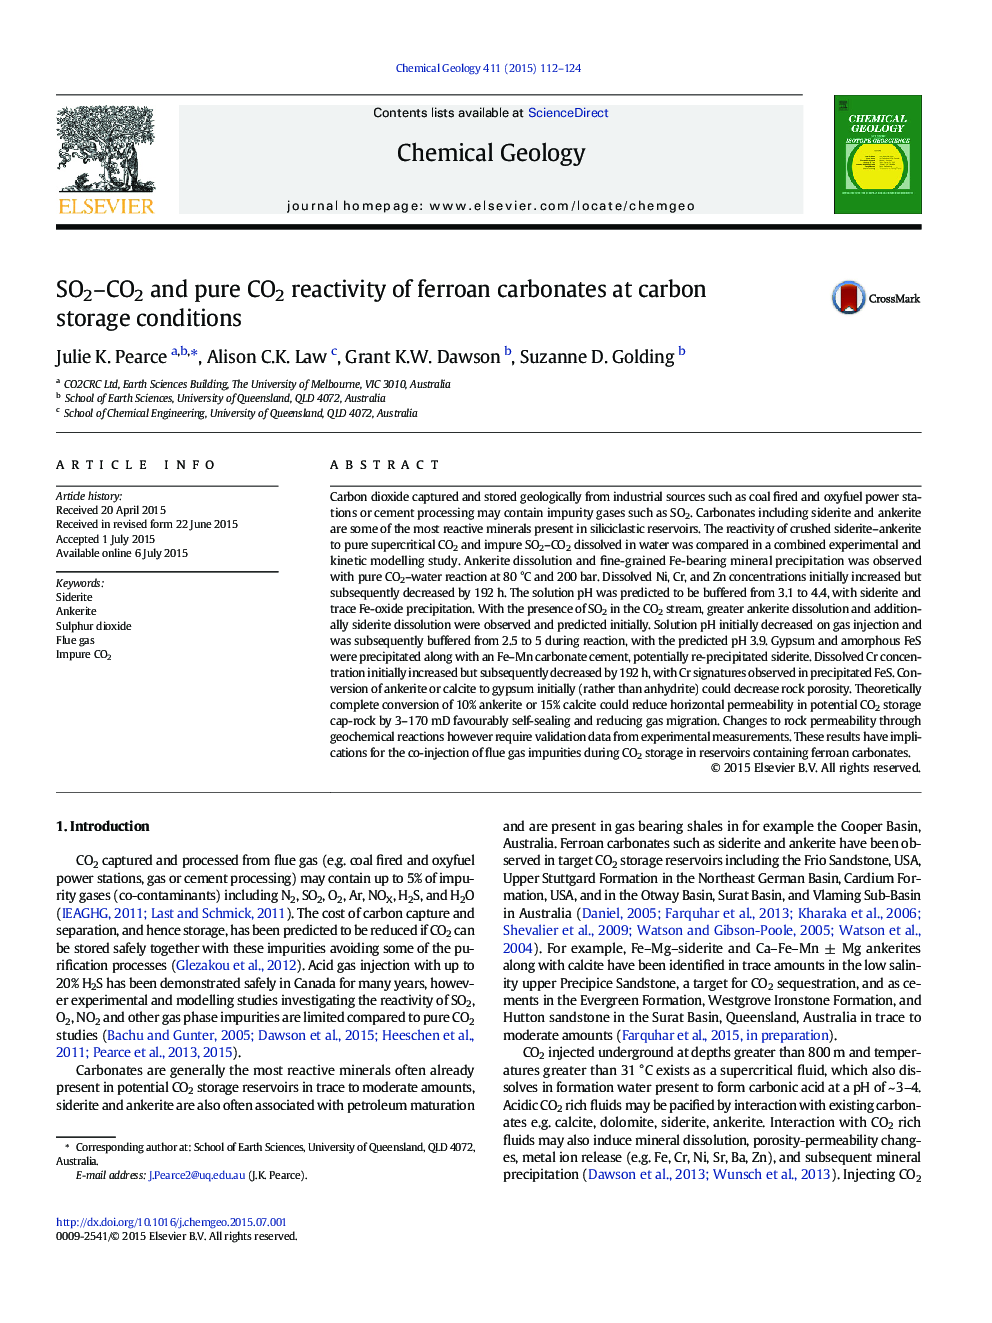 SO2-CO2 and pure CO2 reactivity of ferroan carbonates at carbon storage conditions